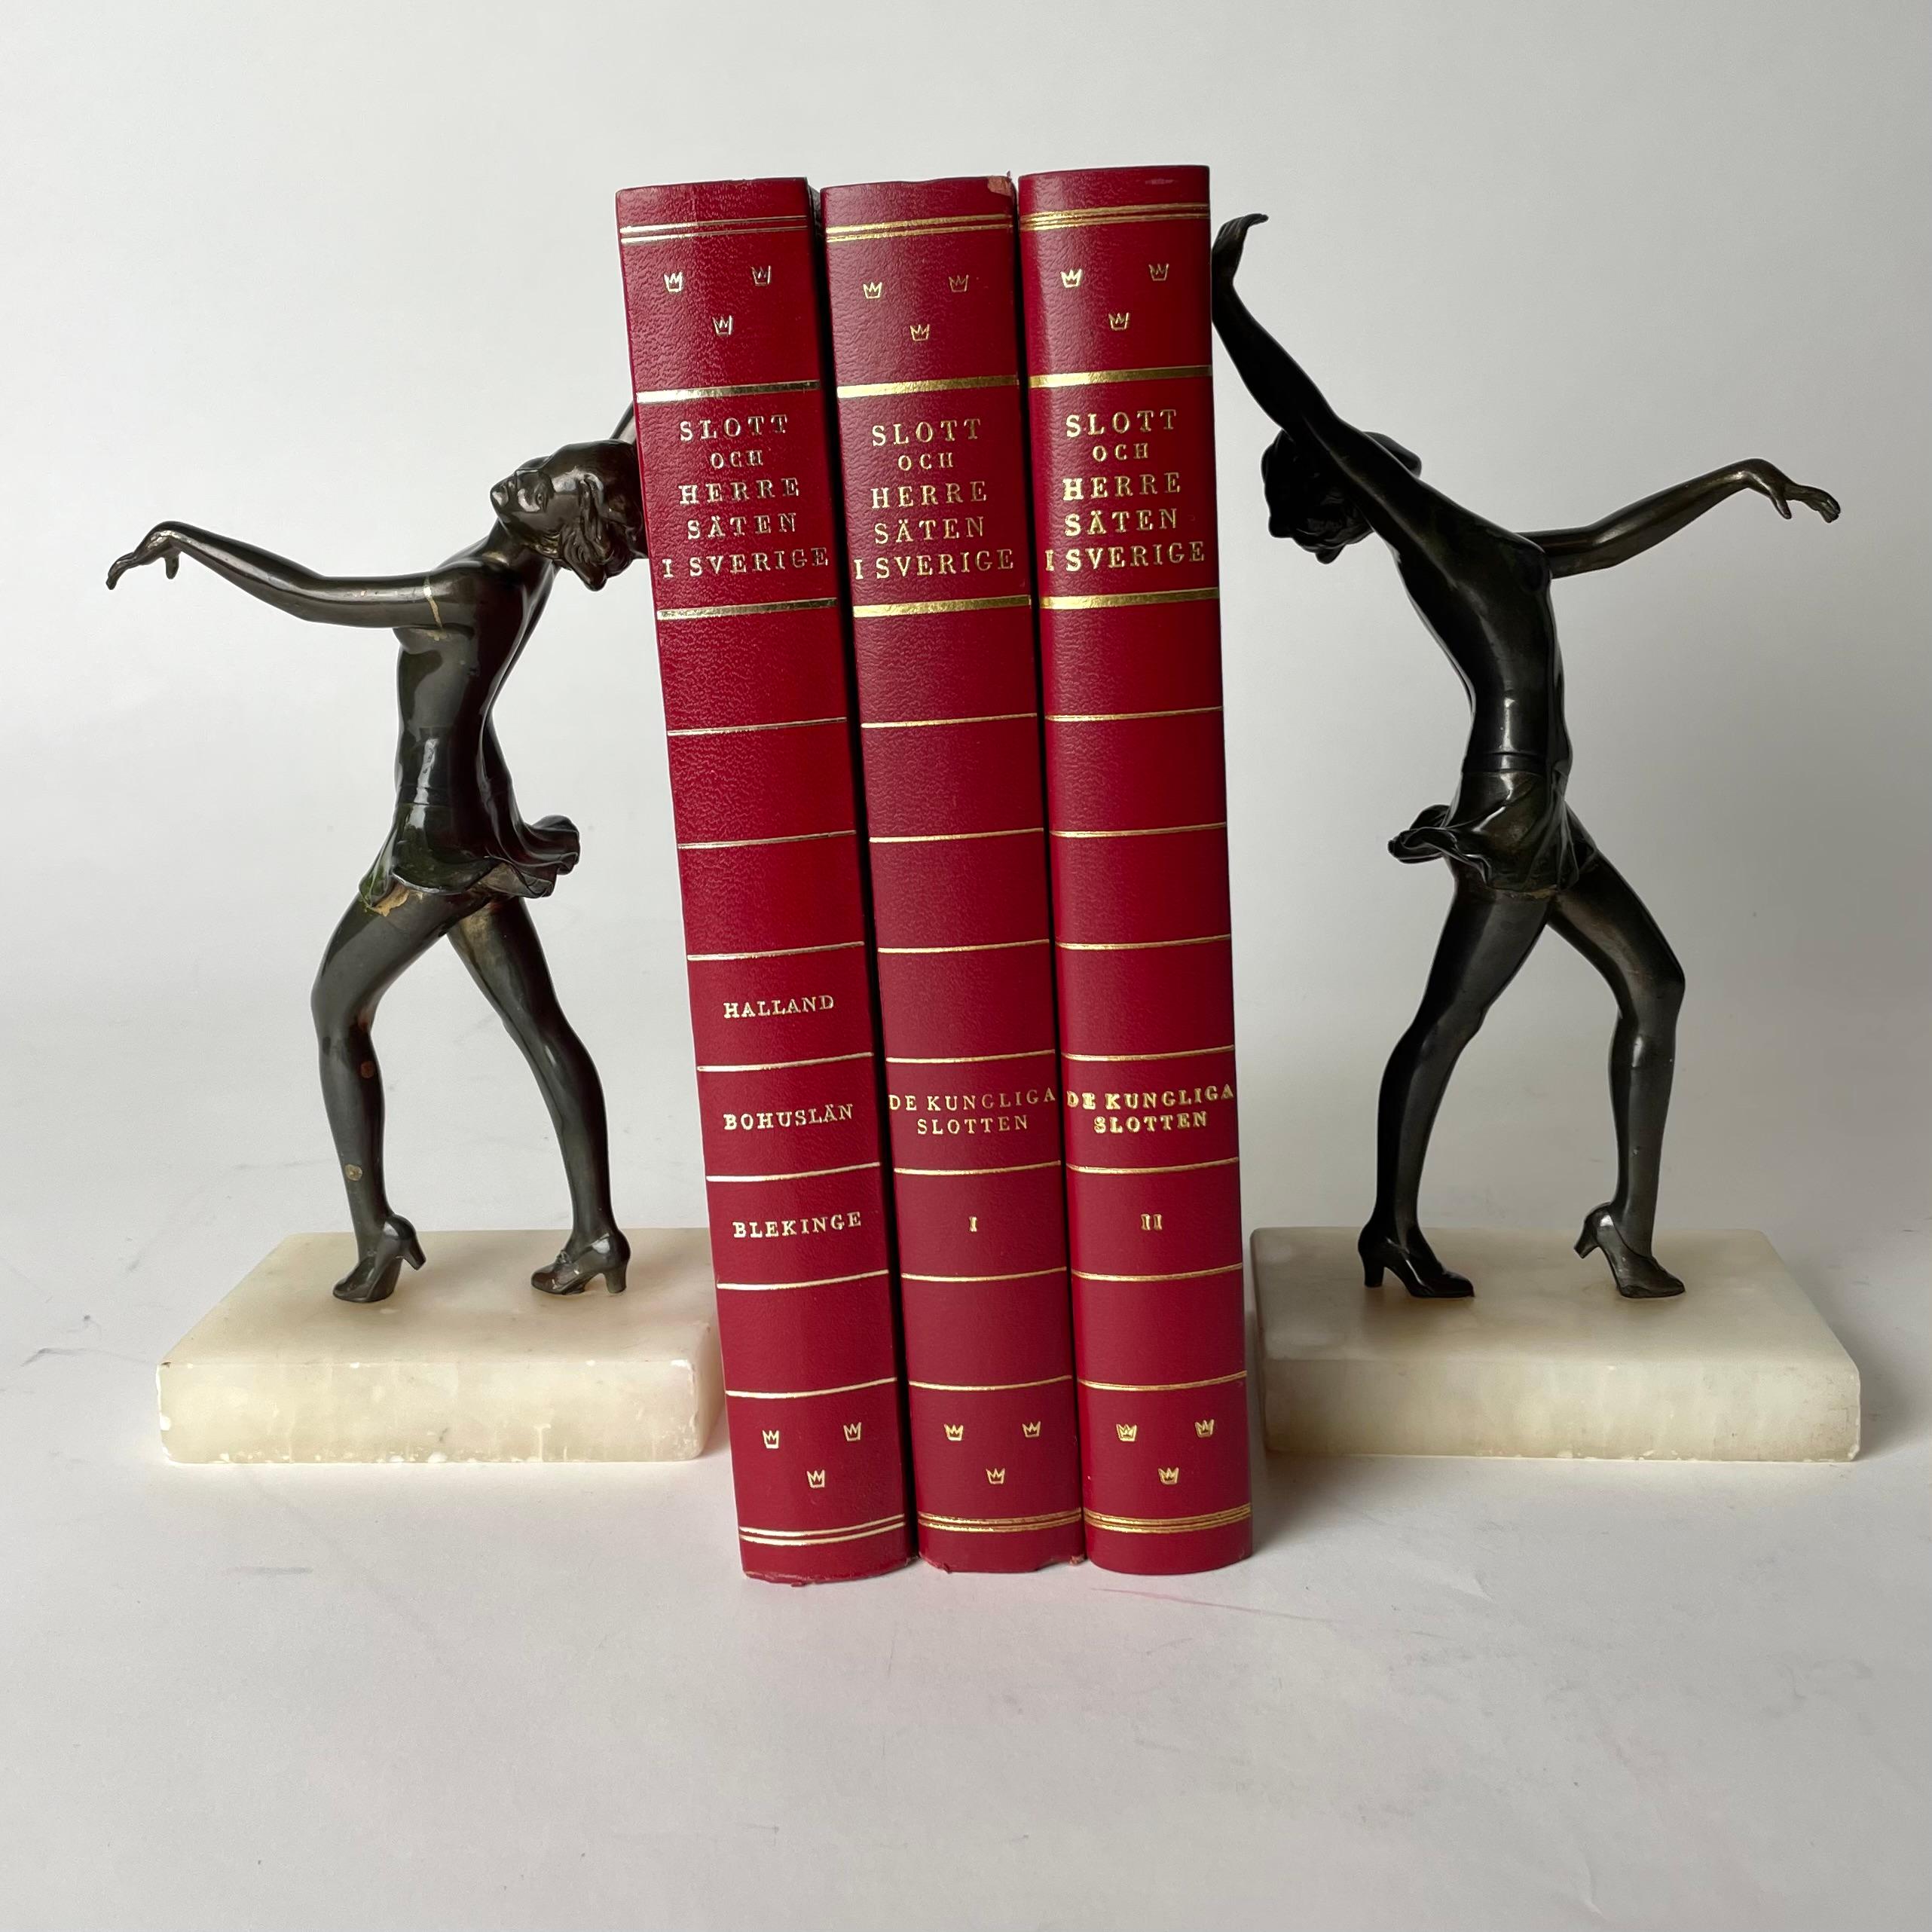 A Elegant pair of period Art Deco Bookends from 1920s-1930s with dancing women. Made in bronzed metal with an Alabaster base. Can be set in different directions. (See pictures)

Wear consistent with age and use